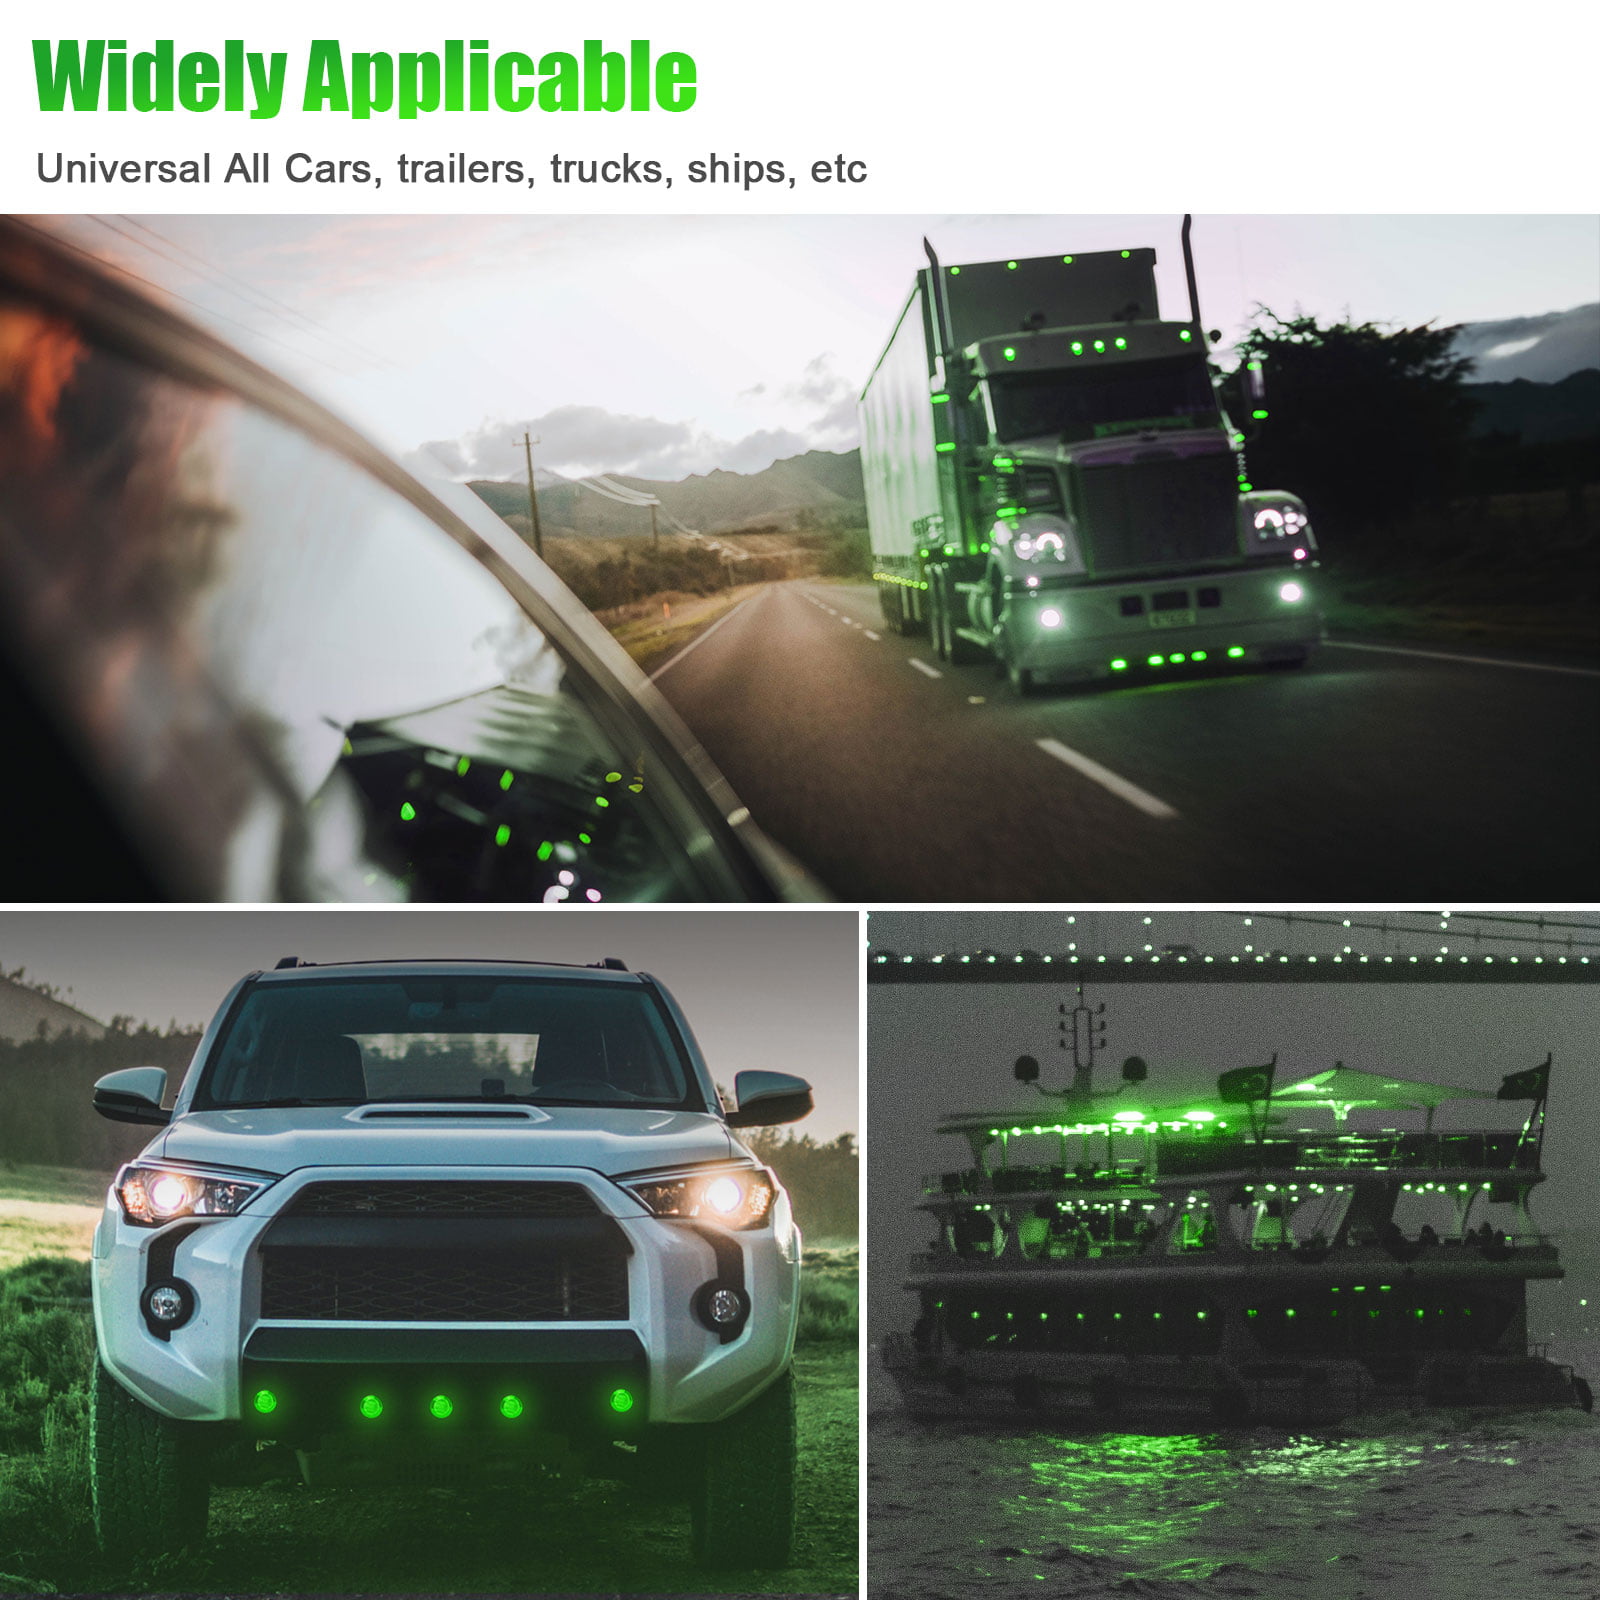 LedVillage 3/4 Inch Mini Round Green Clearance LED Side Marker Indicators Lights Ultra Bright SMD Waterproof Button Truck Trailer Pickup Lorry Camper Sedan Bus Cab 12V DC w/Grommets 3led Pack of 10 